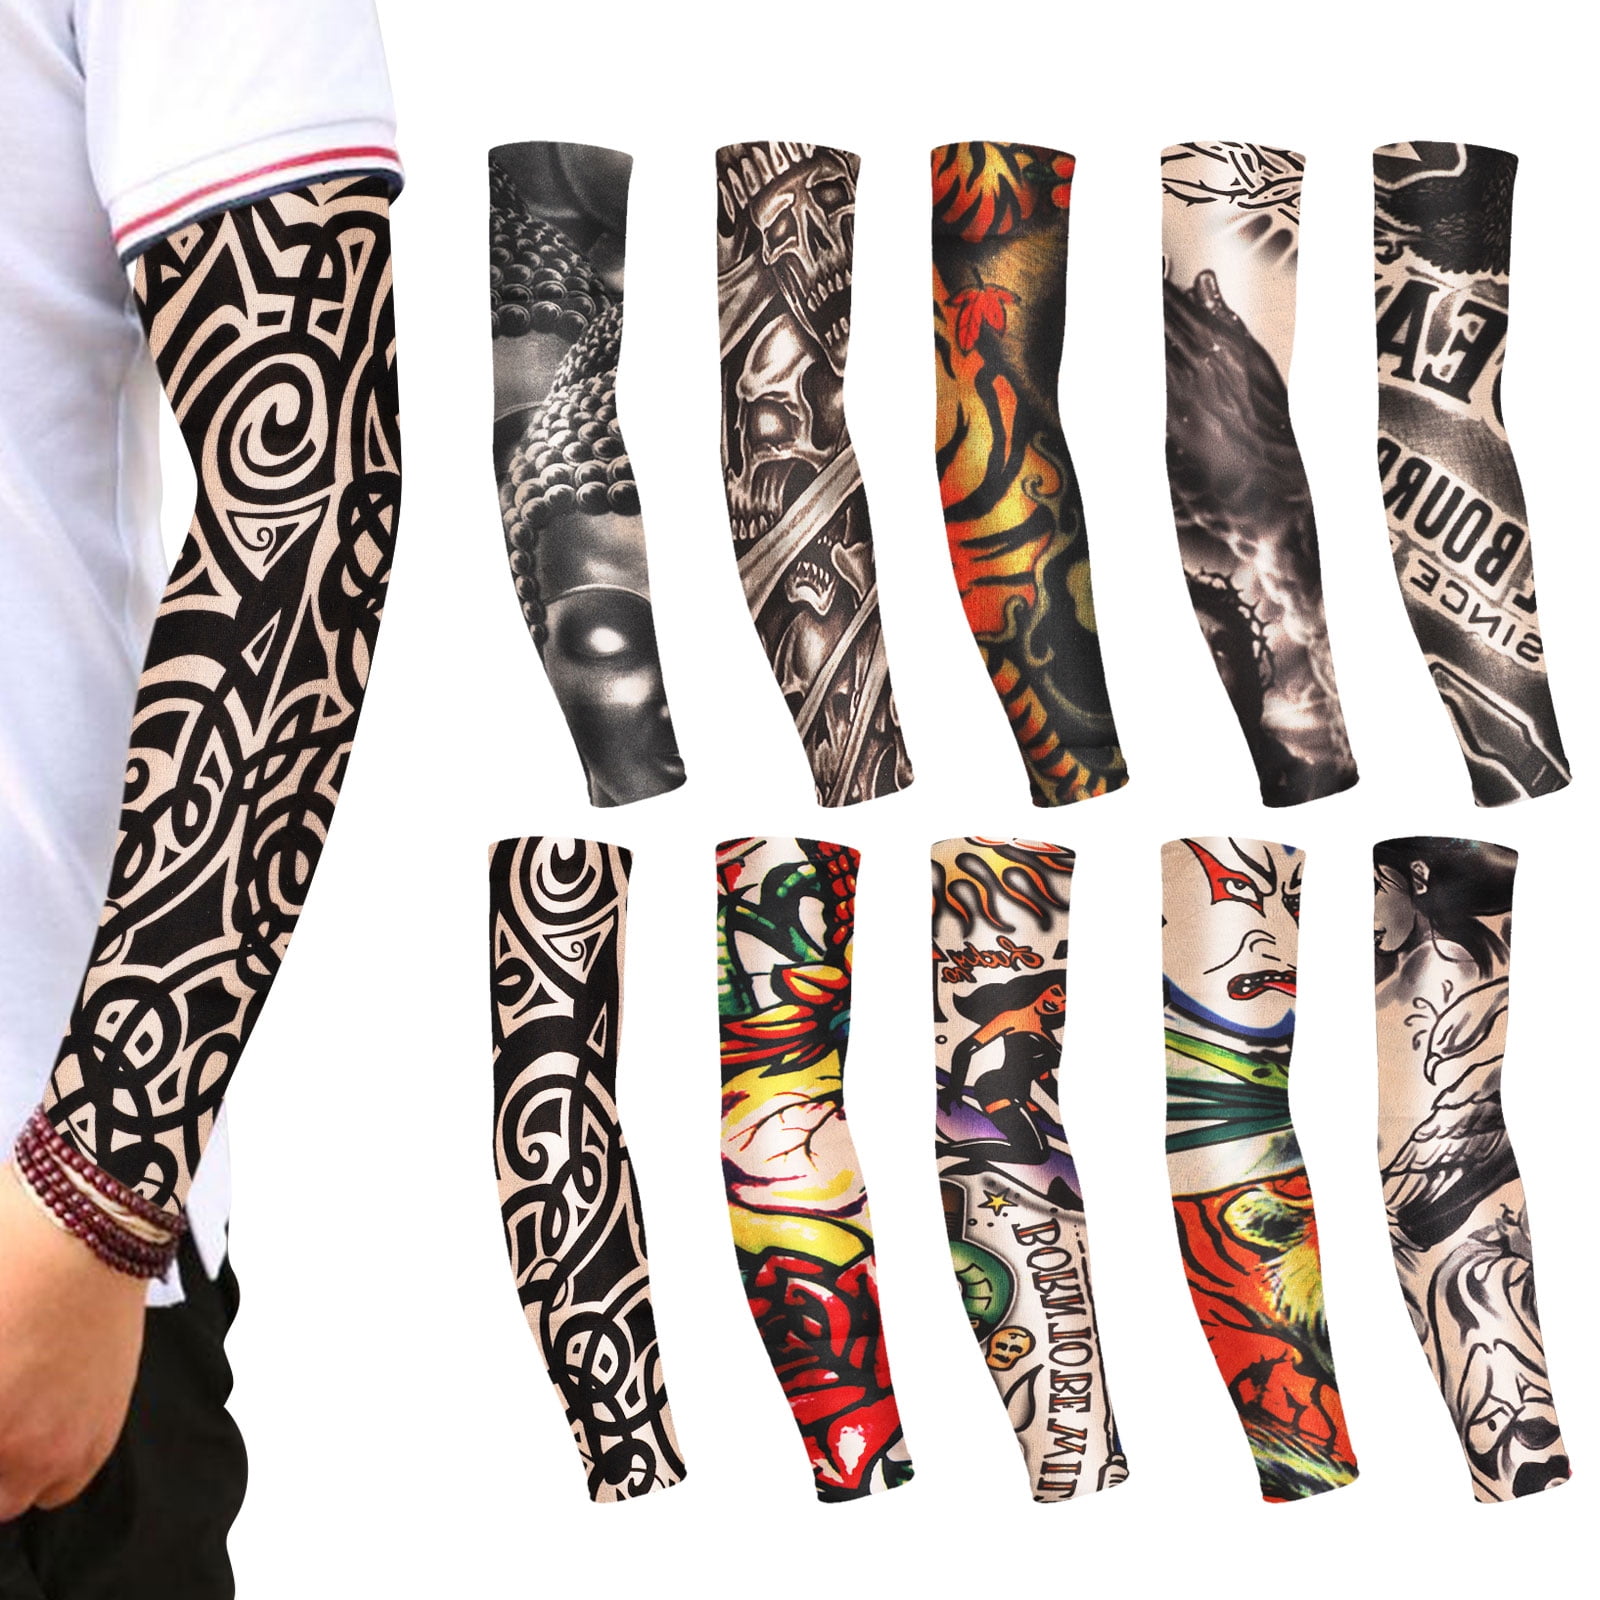 Cooling Arm Sleeves Tattoo Cover UV Sun Protection Outdoor Sports For Men Women 